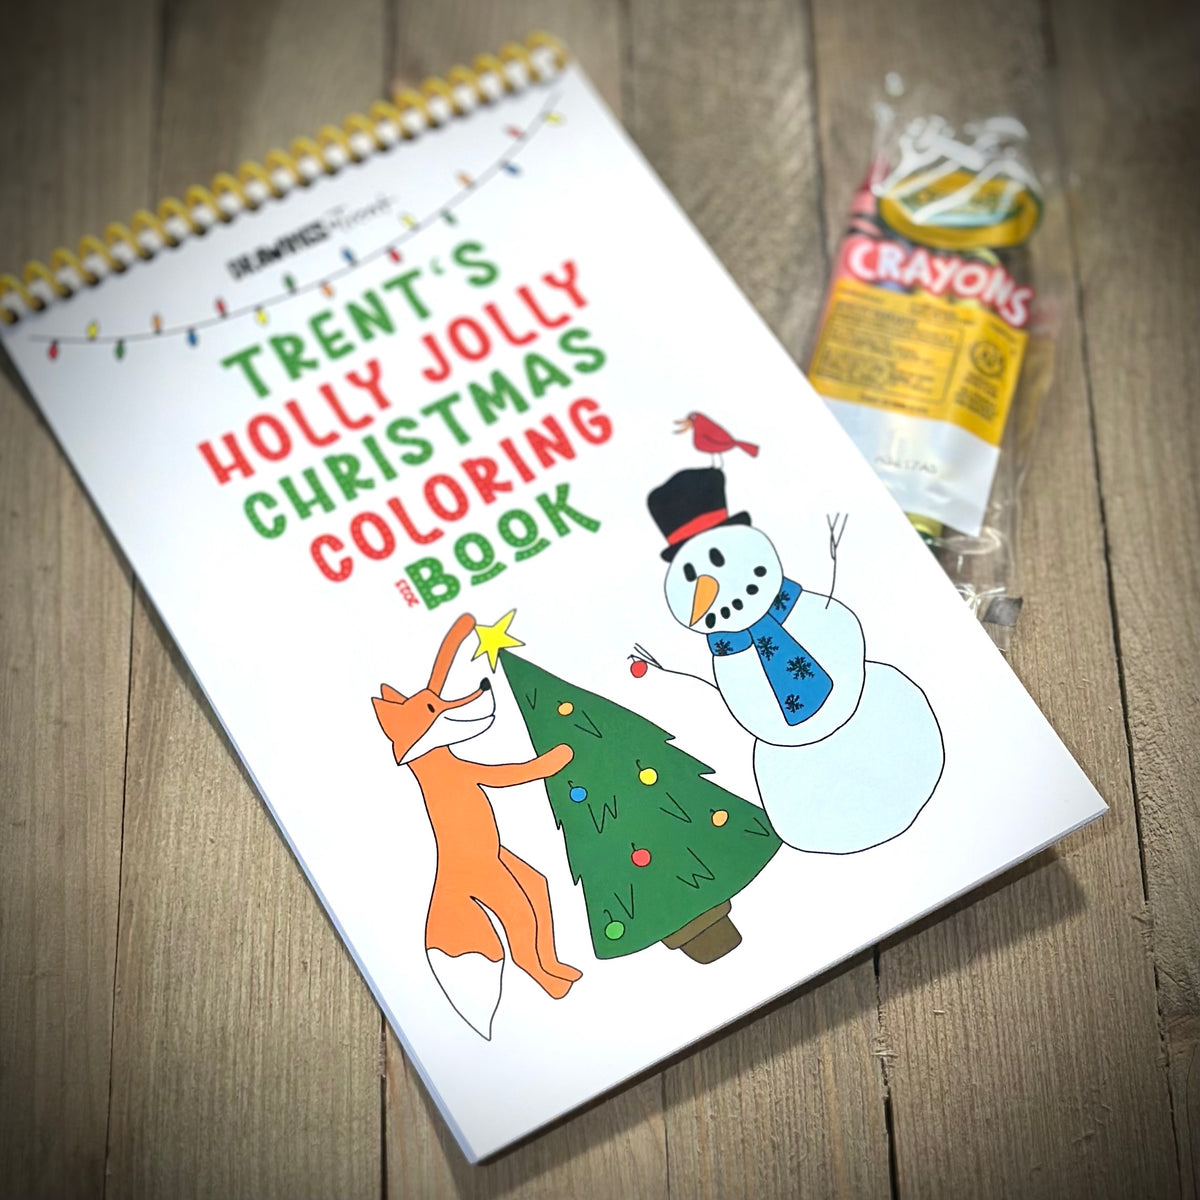 Trent's Holly Jolly Christmas Coloring Book